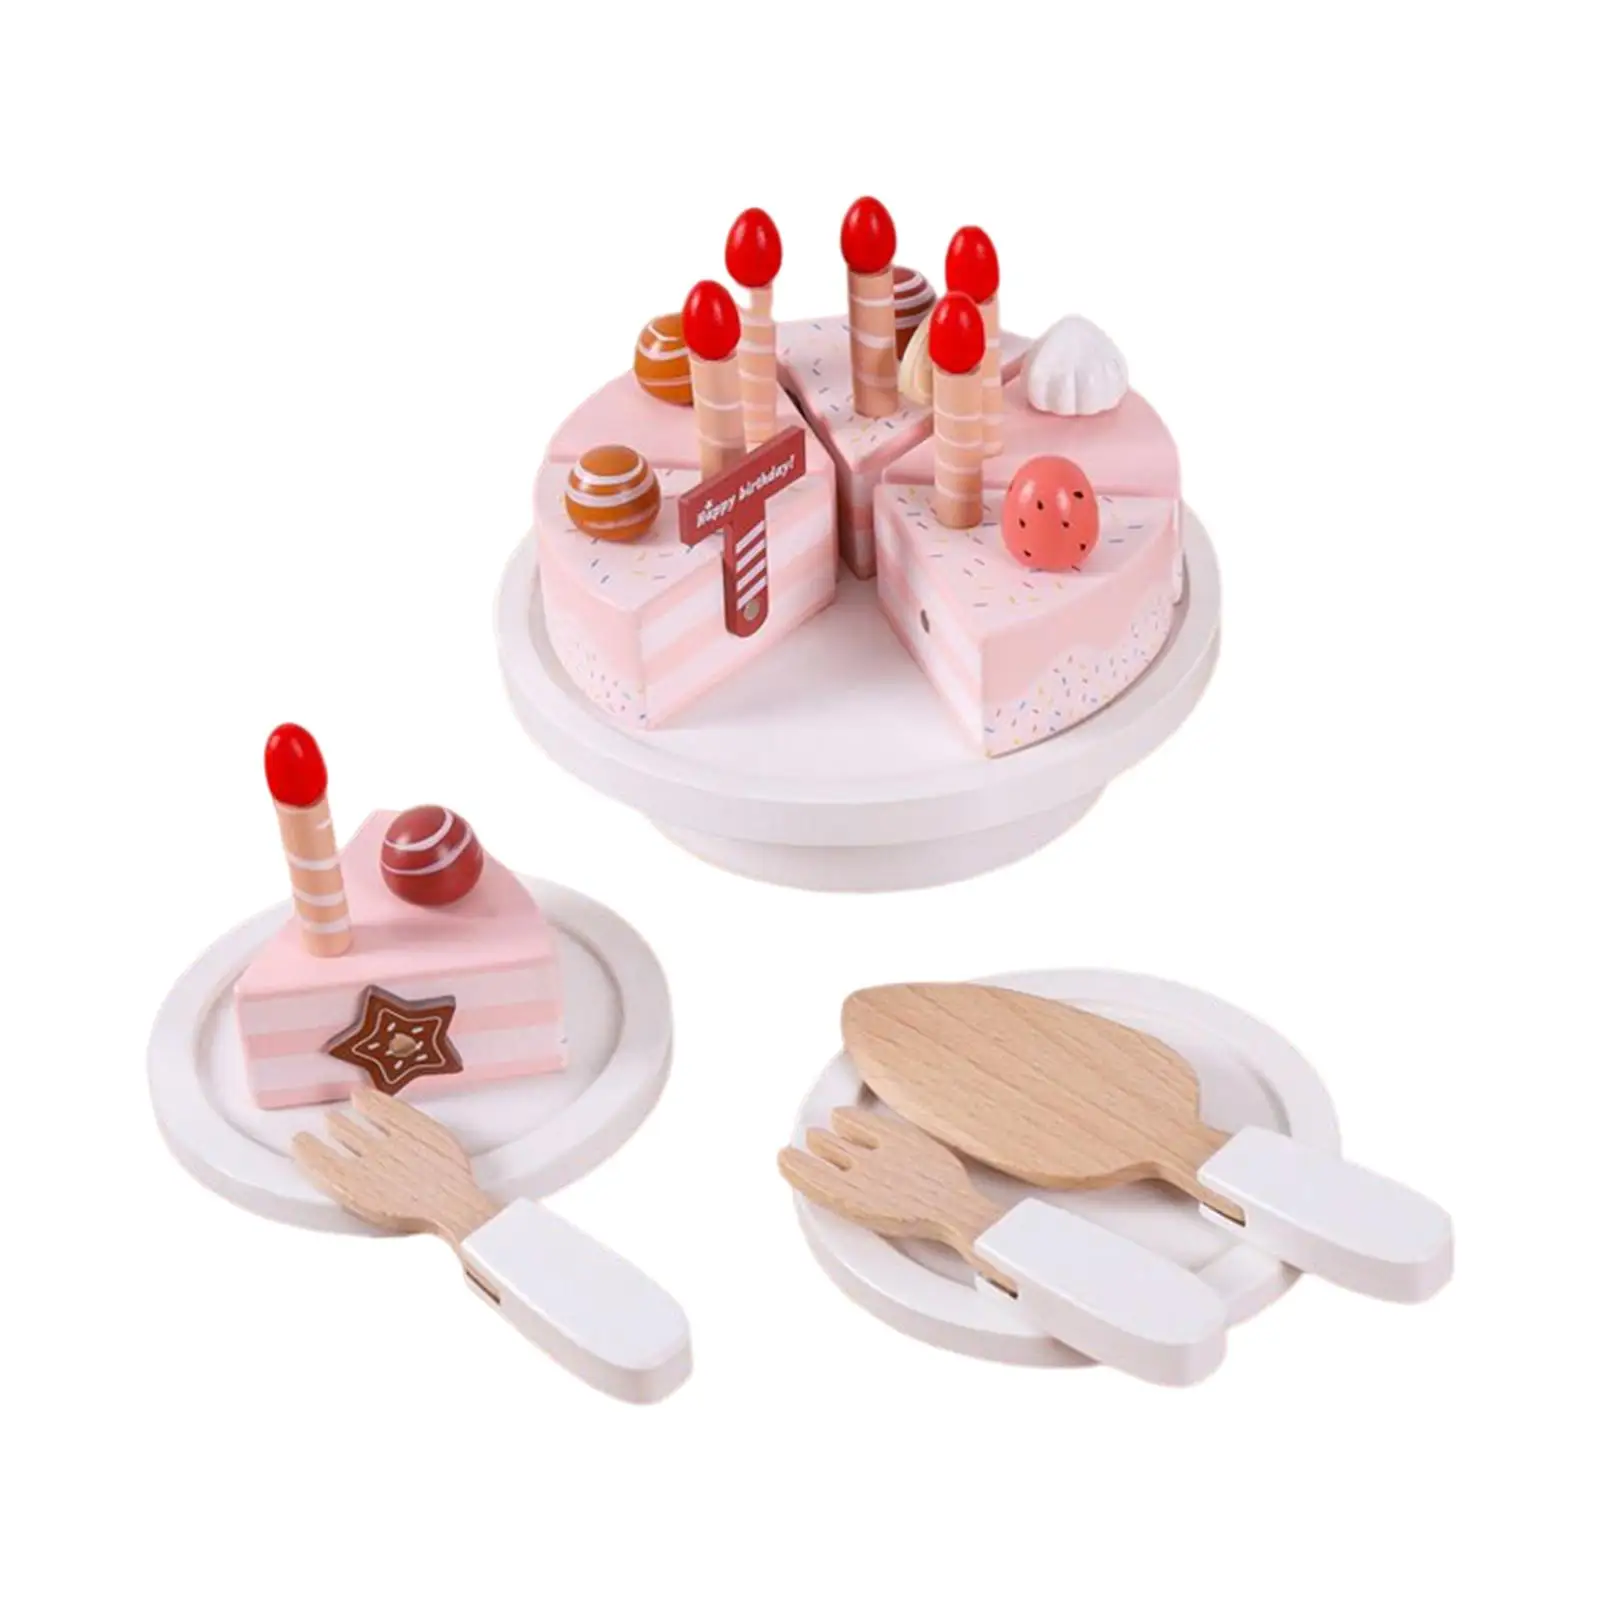 Wooden Cake Toys with Candles Education Role Play Toys DIY Pretend Play Food Kitchen Toys for Boys Kids Preschool Holiday Gifts